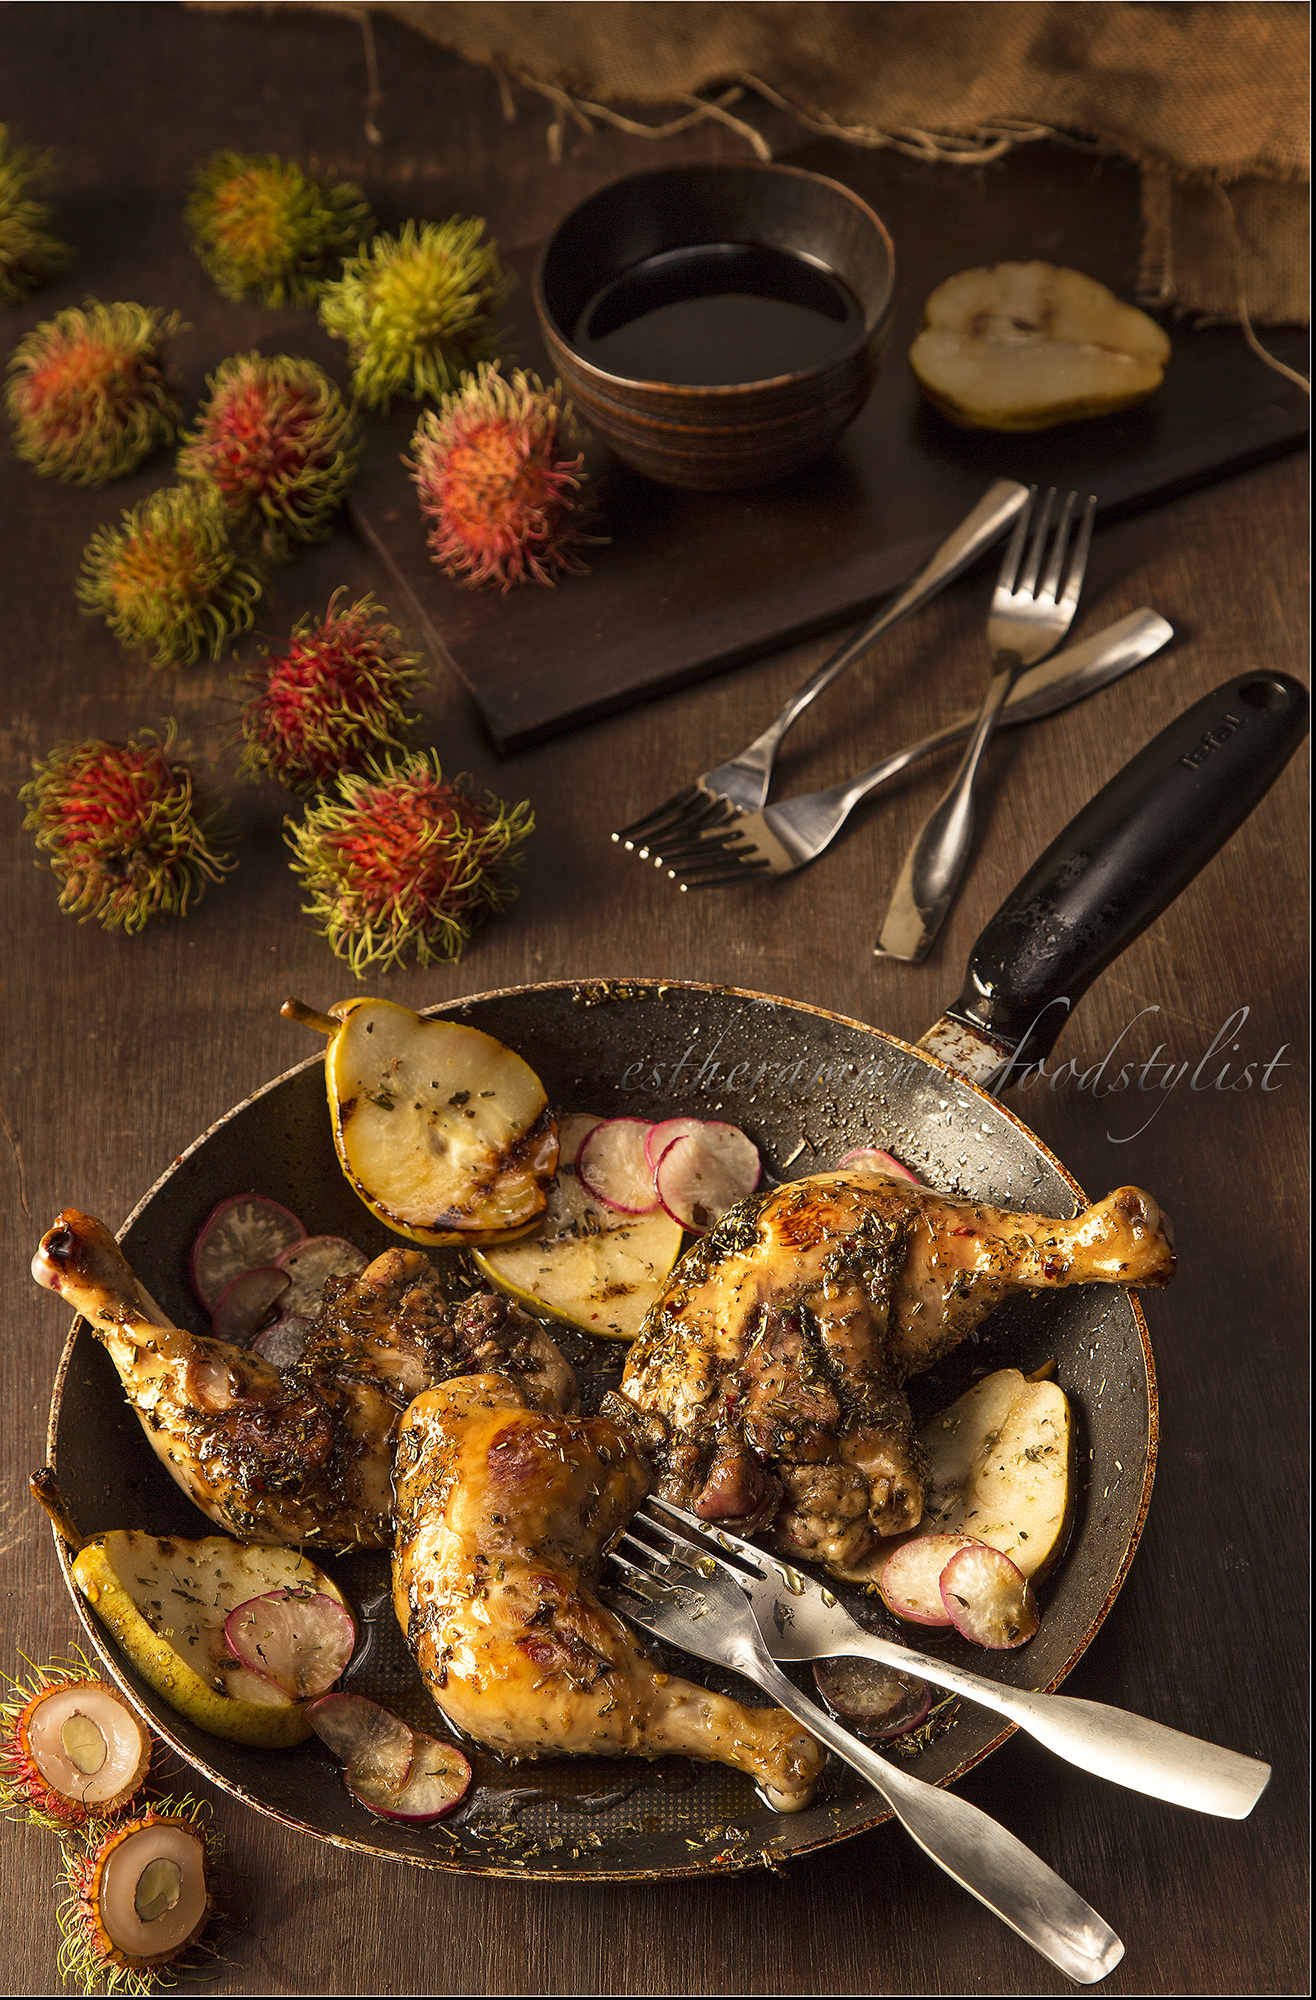 Barbequed chicken with roasted pears,food styling